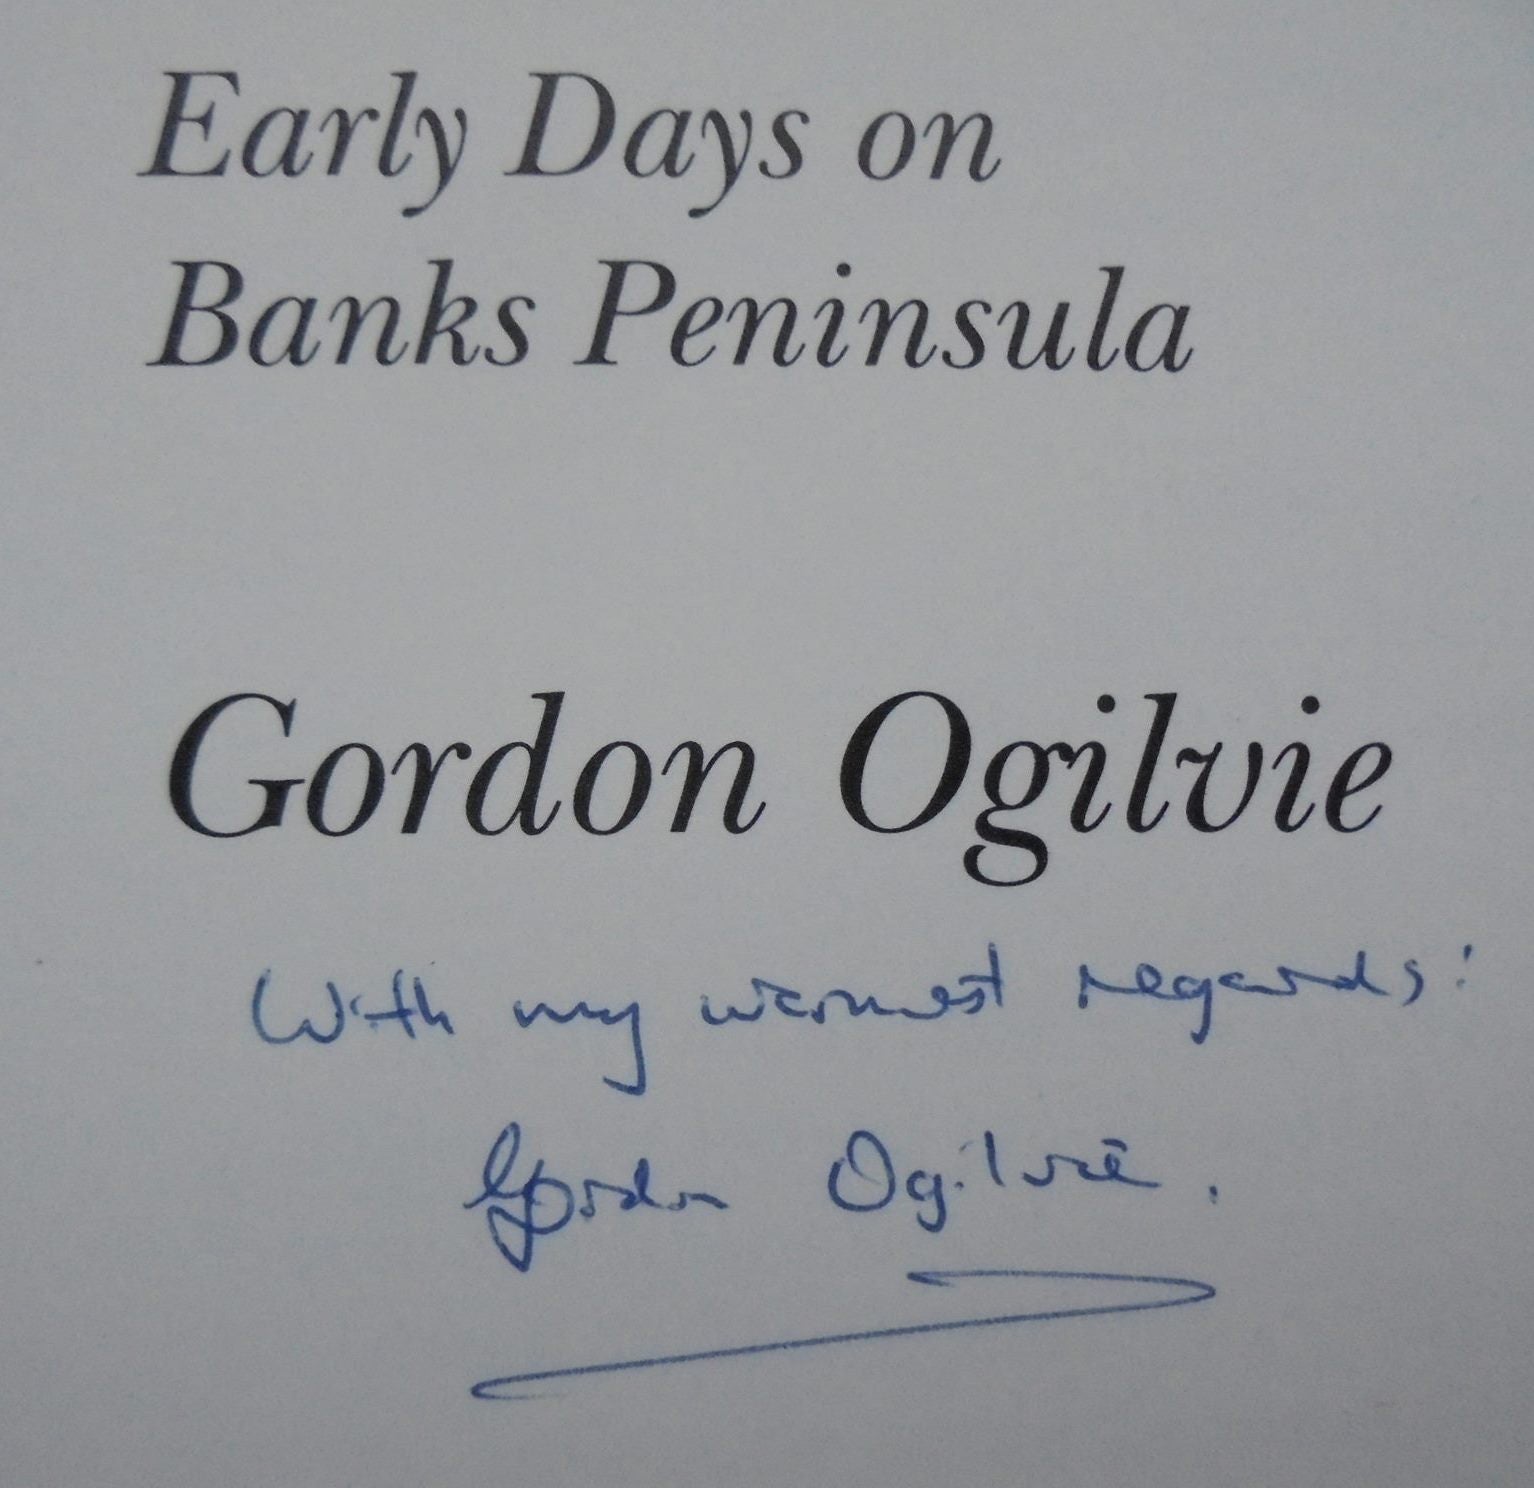 Picturing the Peninsula. Early Days on the Banks Peninsula. SIGNED by Gordon Ogilvie